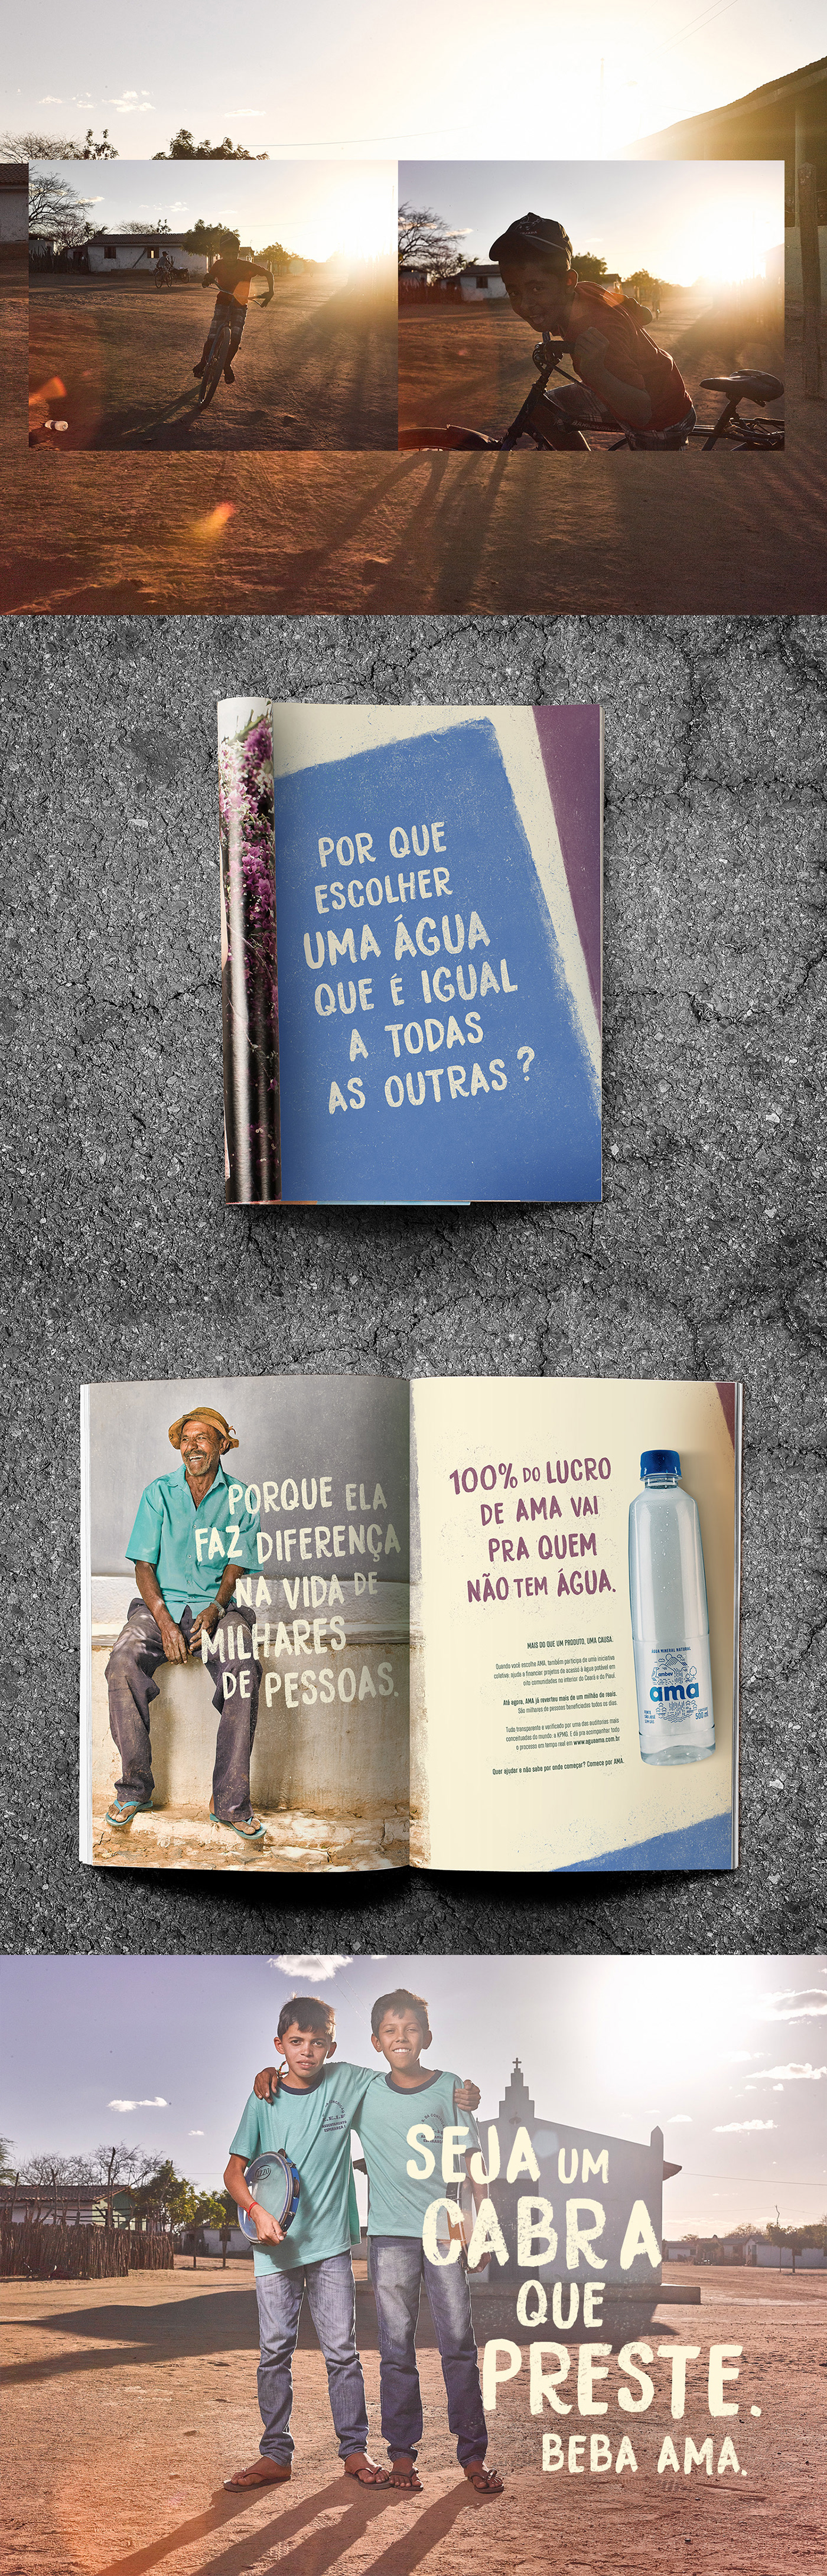 ad digital Advertising  water social issue Photography  art direction  video case social Brazil